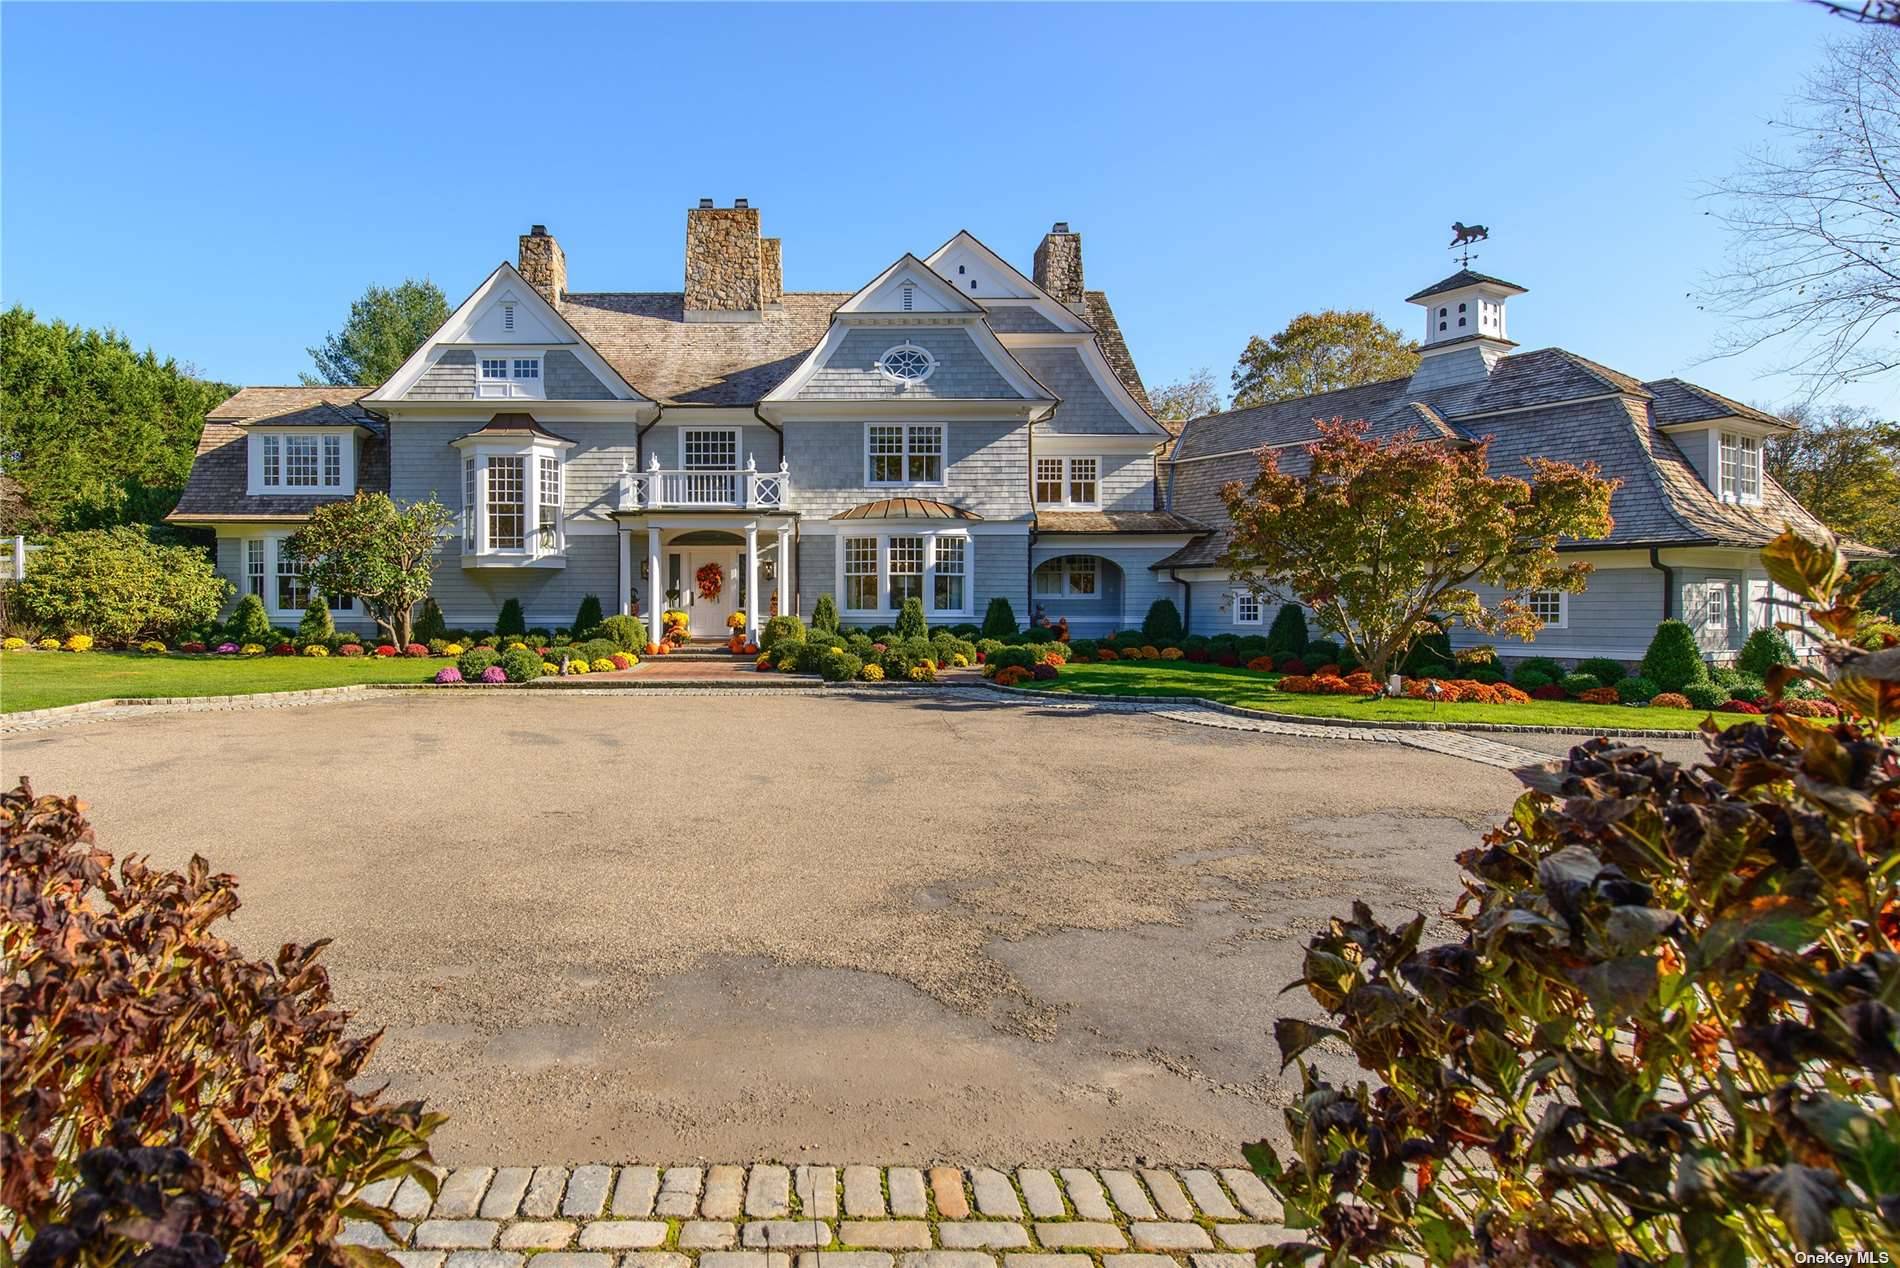 Traditional Architectural Design amp ; Superior Interior Detail Combine To Create This Stunning Southampton Shingle Style Residence, Built By John Kean Development Using The Finest Of Materials.